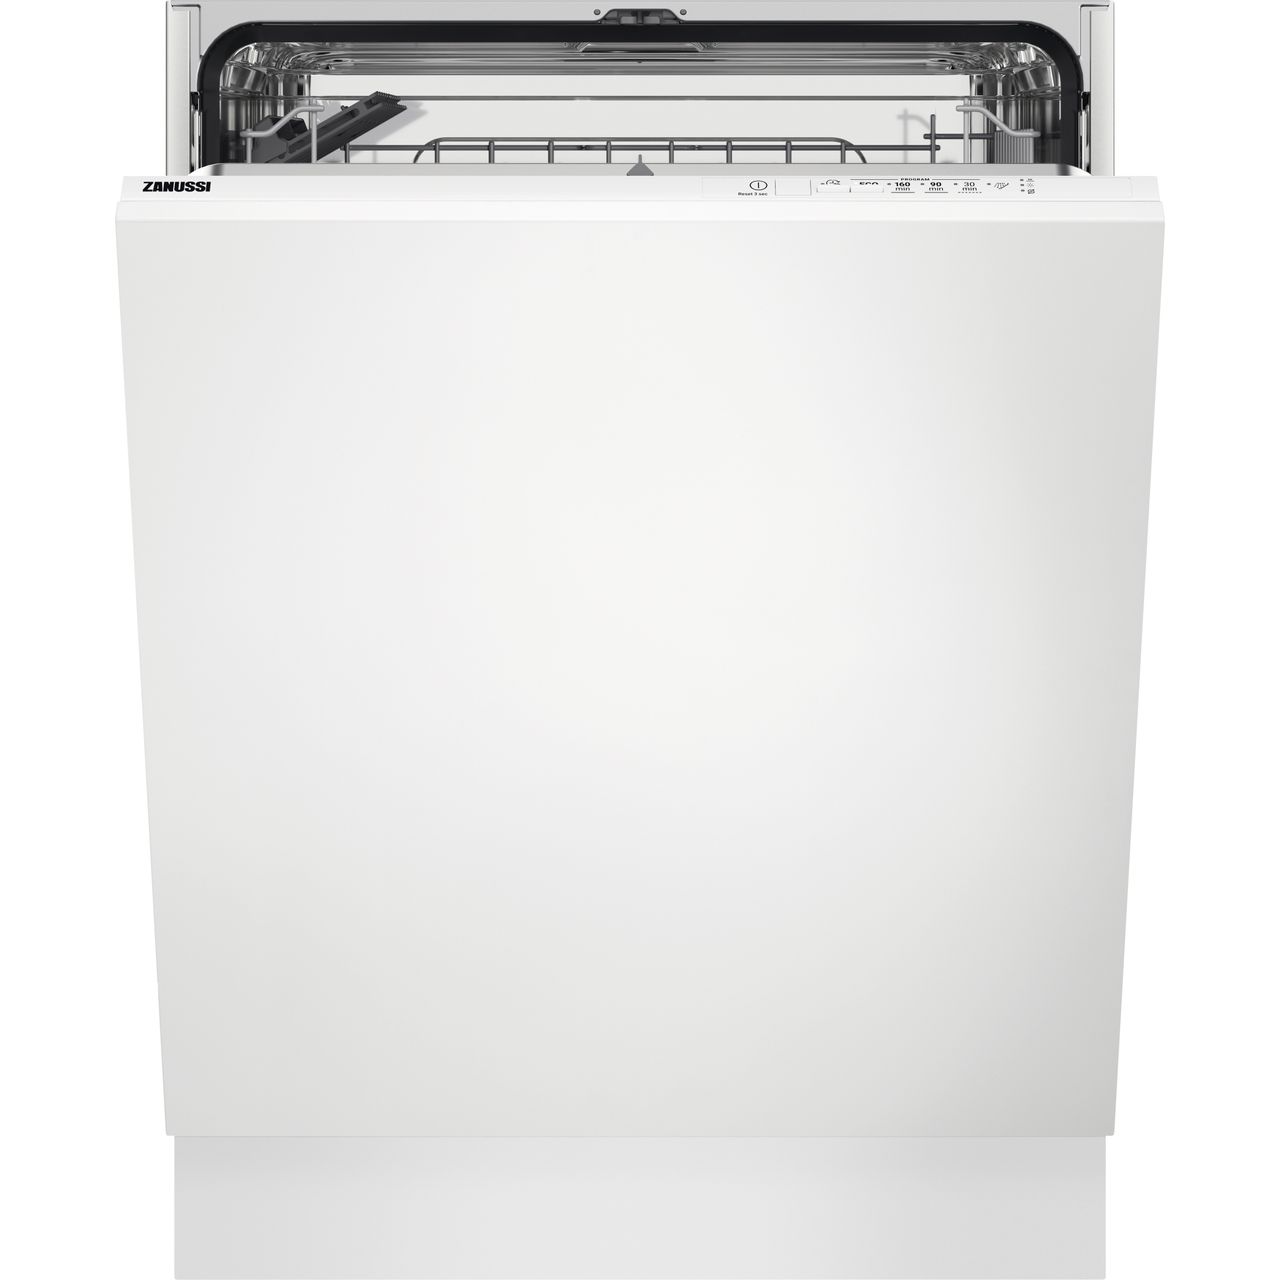 Zanussi ZDLN1512 Fully Integrated Standard Dishwasher Review